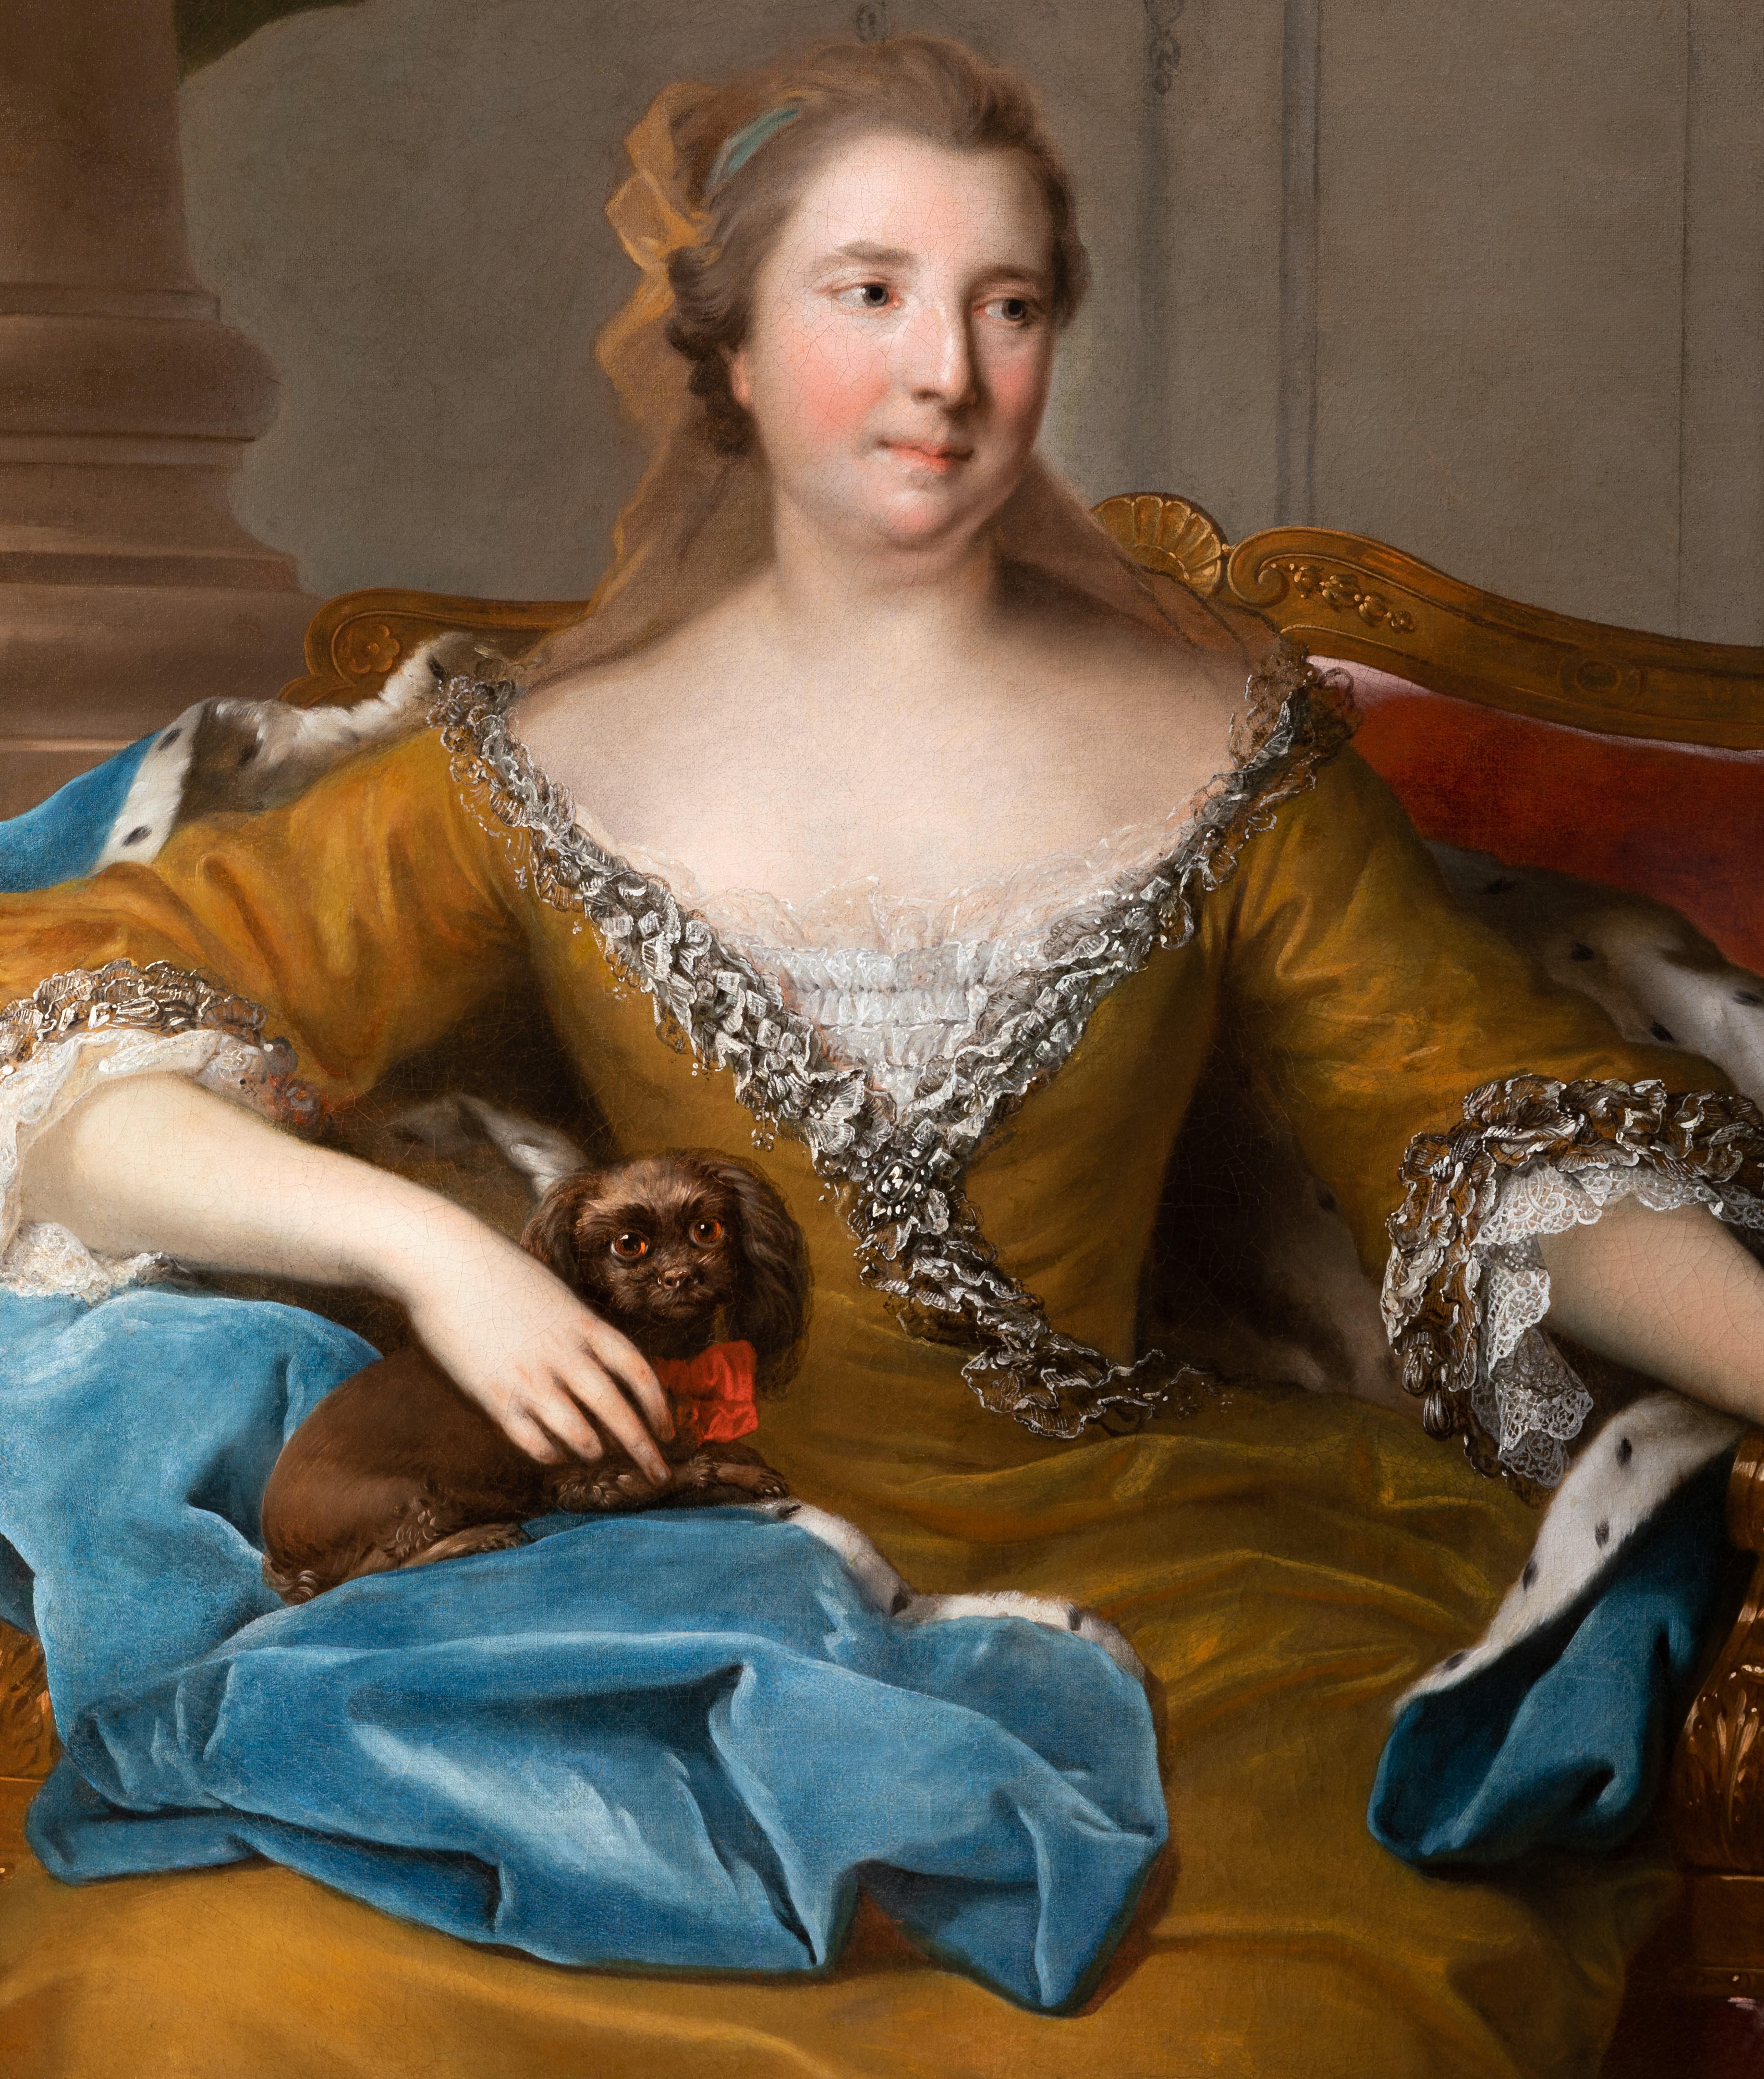 Jean-Marc Nattier (Paris, 1685 - 1766) and his workshop

Portrait of Charlotte de Hesse-Rheinfels

Oil on canvas : h. 44.09 in, w. 38.19 in

18th century carved giltwood framed

 Framed : h. 52.36 in, w. 47.63 in

Charlotte de Hesse-Rheinfels